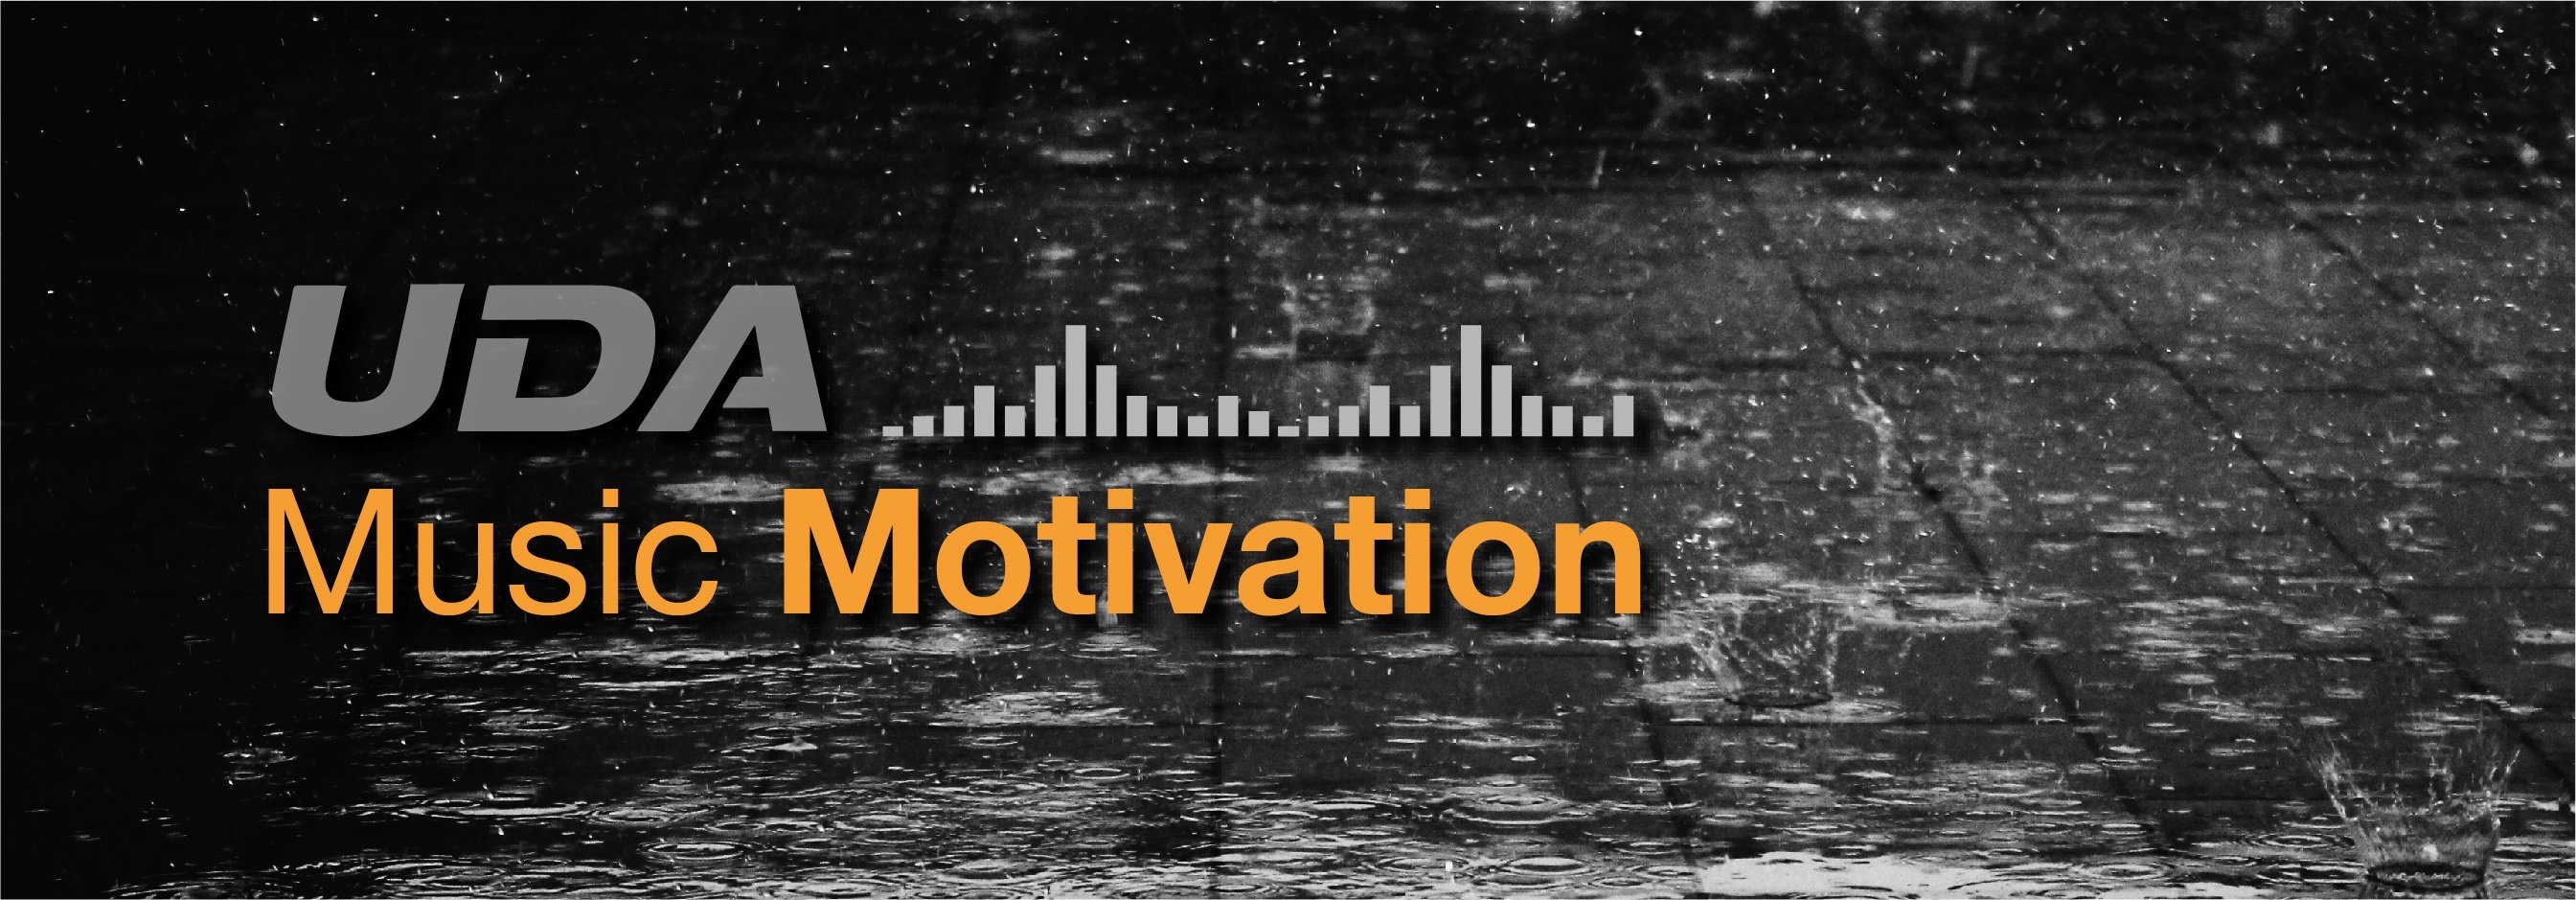 Music Motivation: Stuck In the Office on a Rainy Day